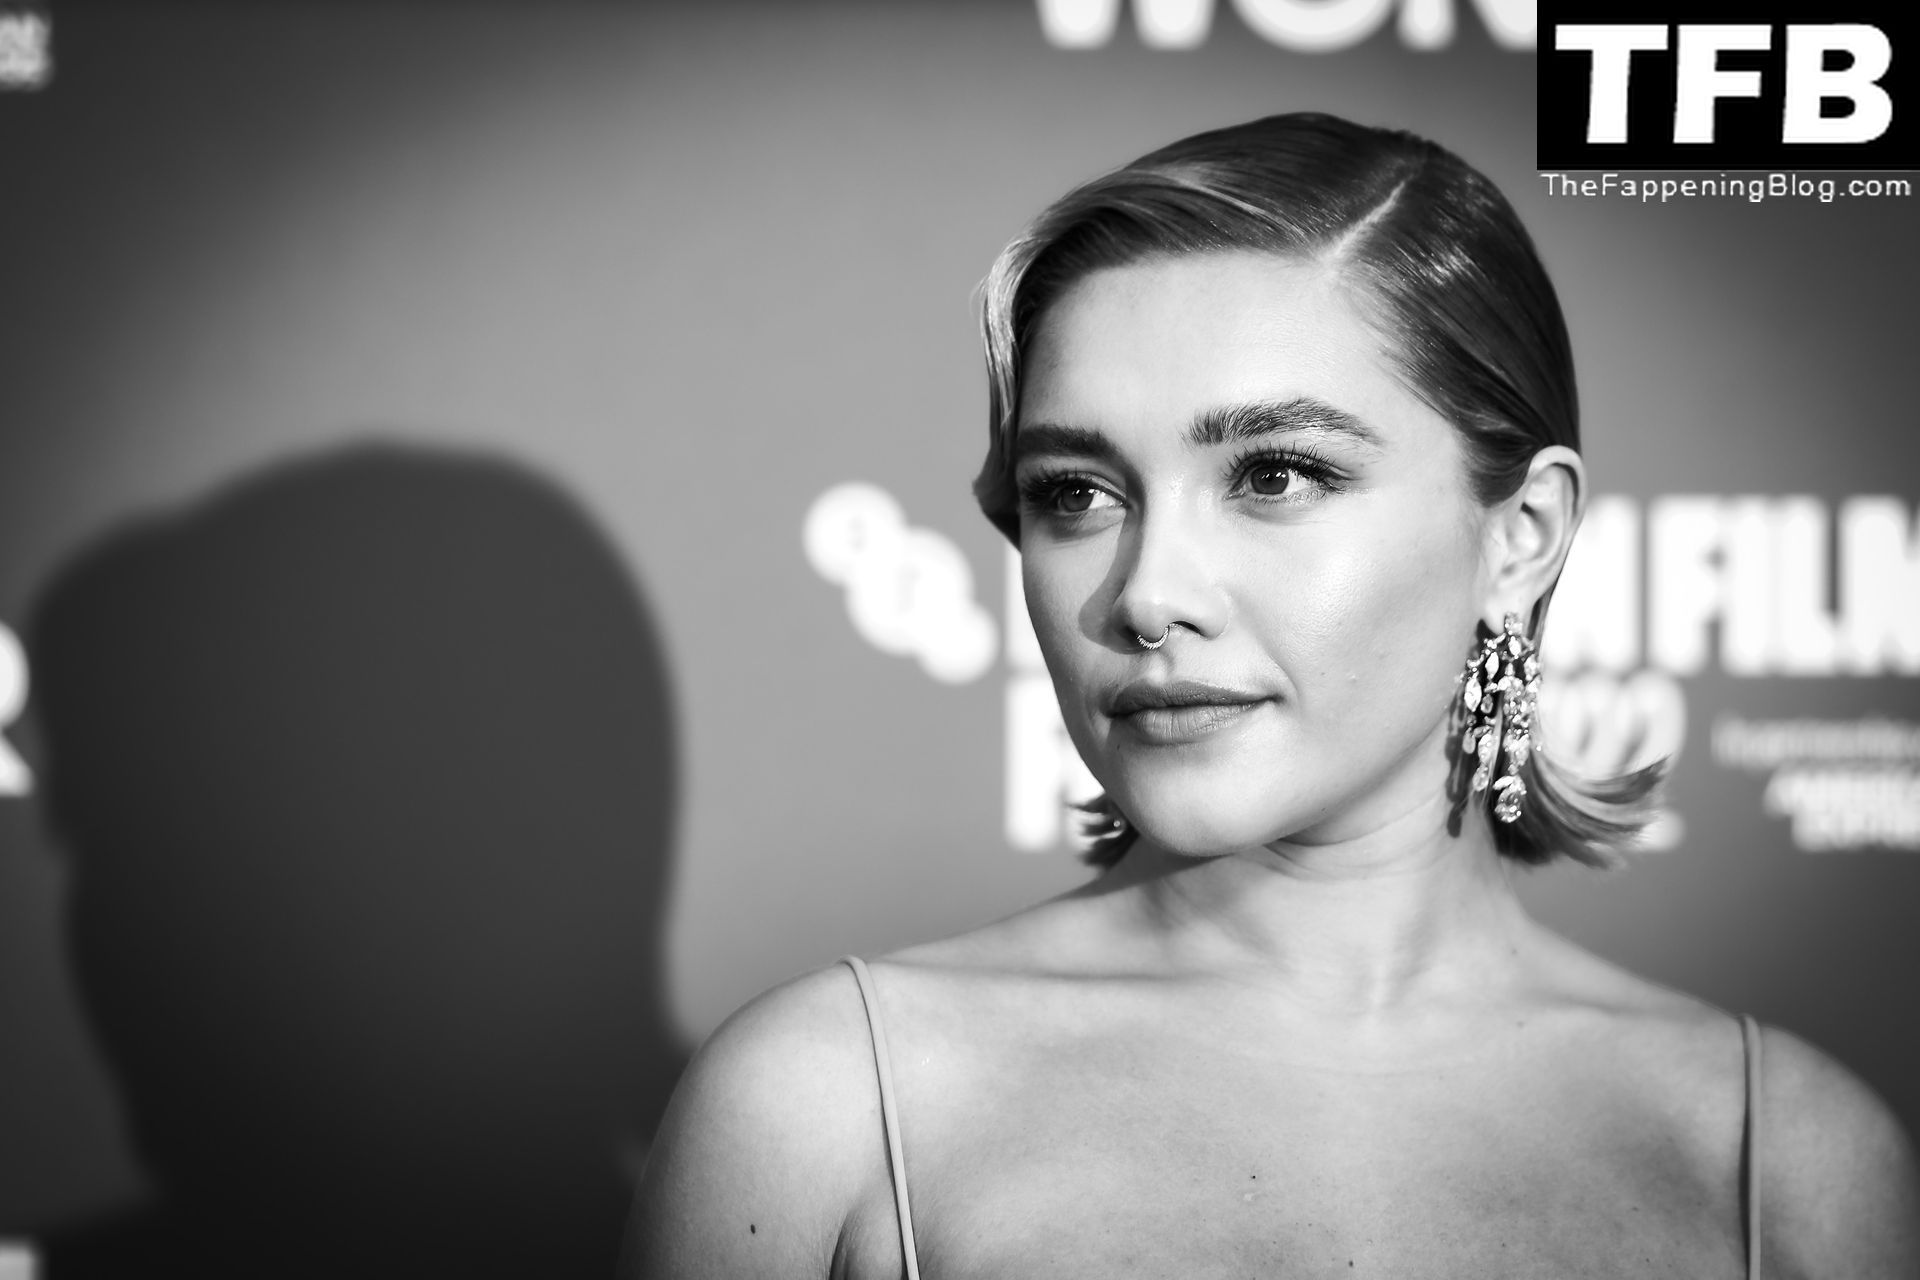 Florence Pugh Stuns on the Red Carpet at “The Wonder” Premiere in London (163 Photos)